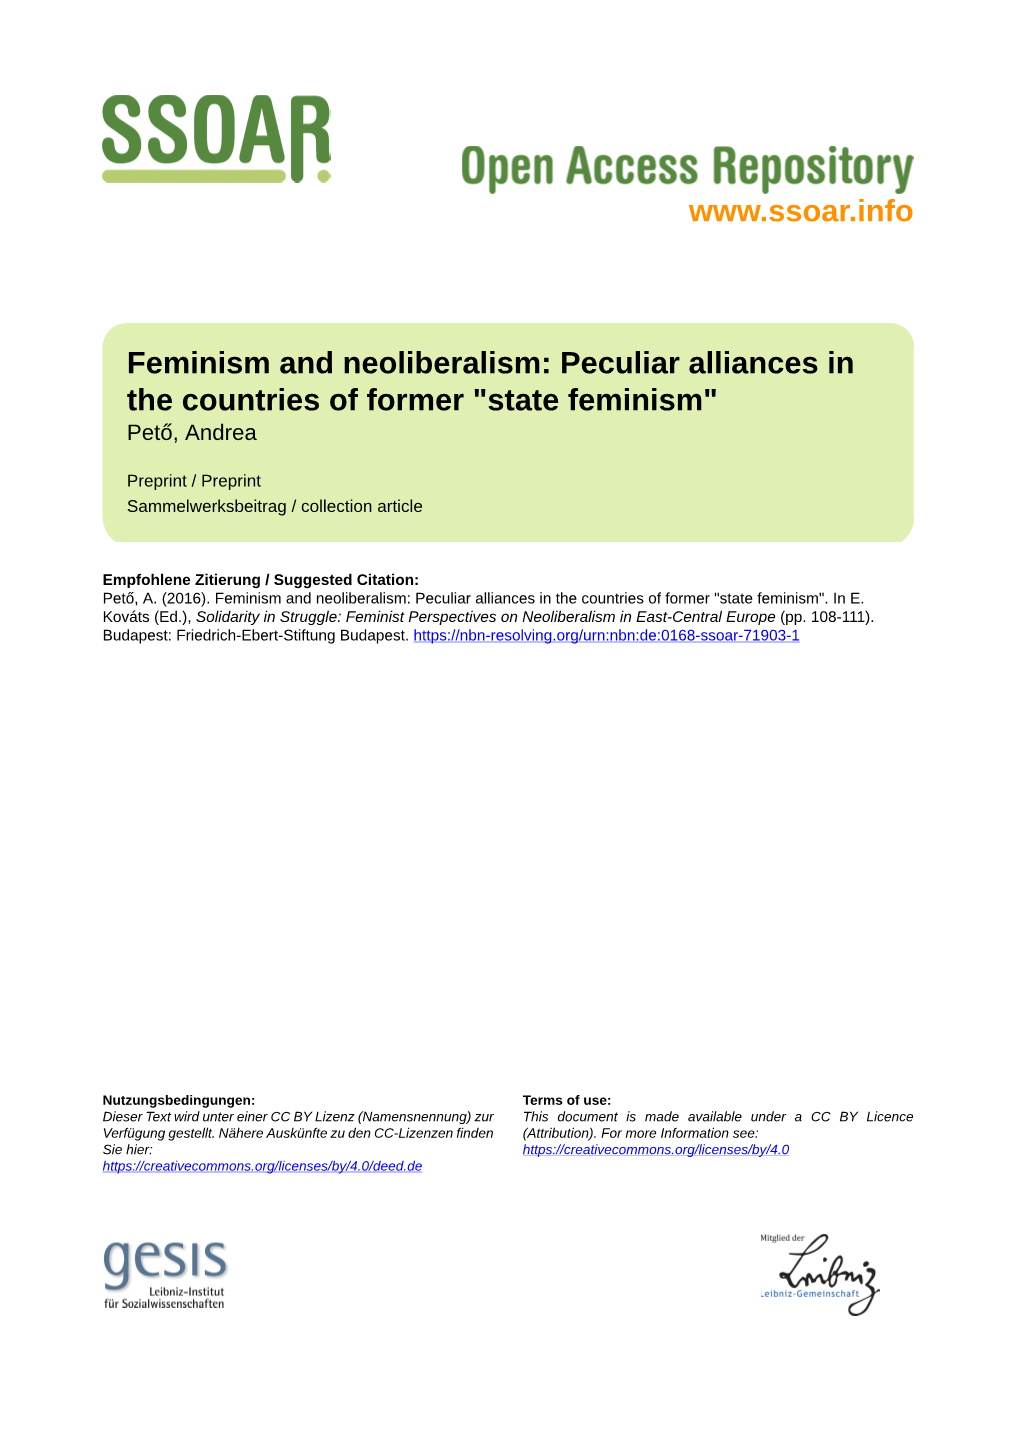 Feminism and Neoliberalism: Peculiar Alliances in the Countries of Former "State Feminism" Pető, Andrea